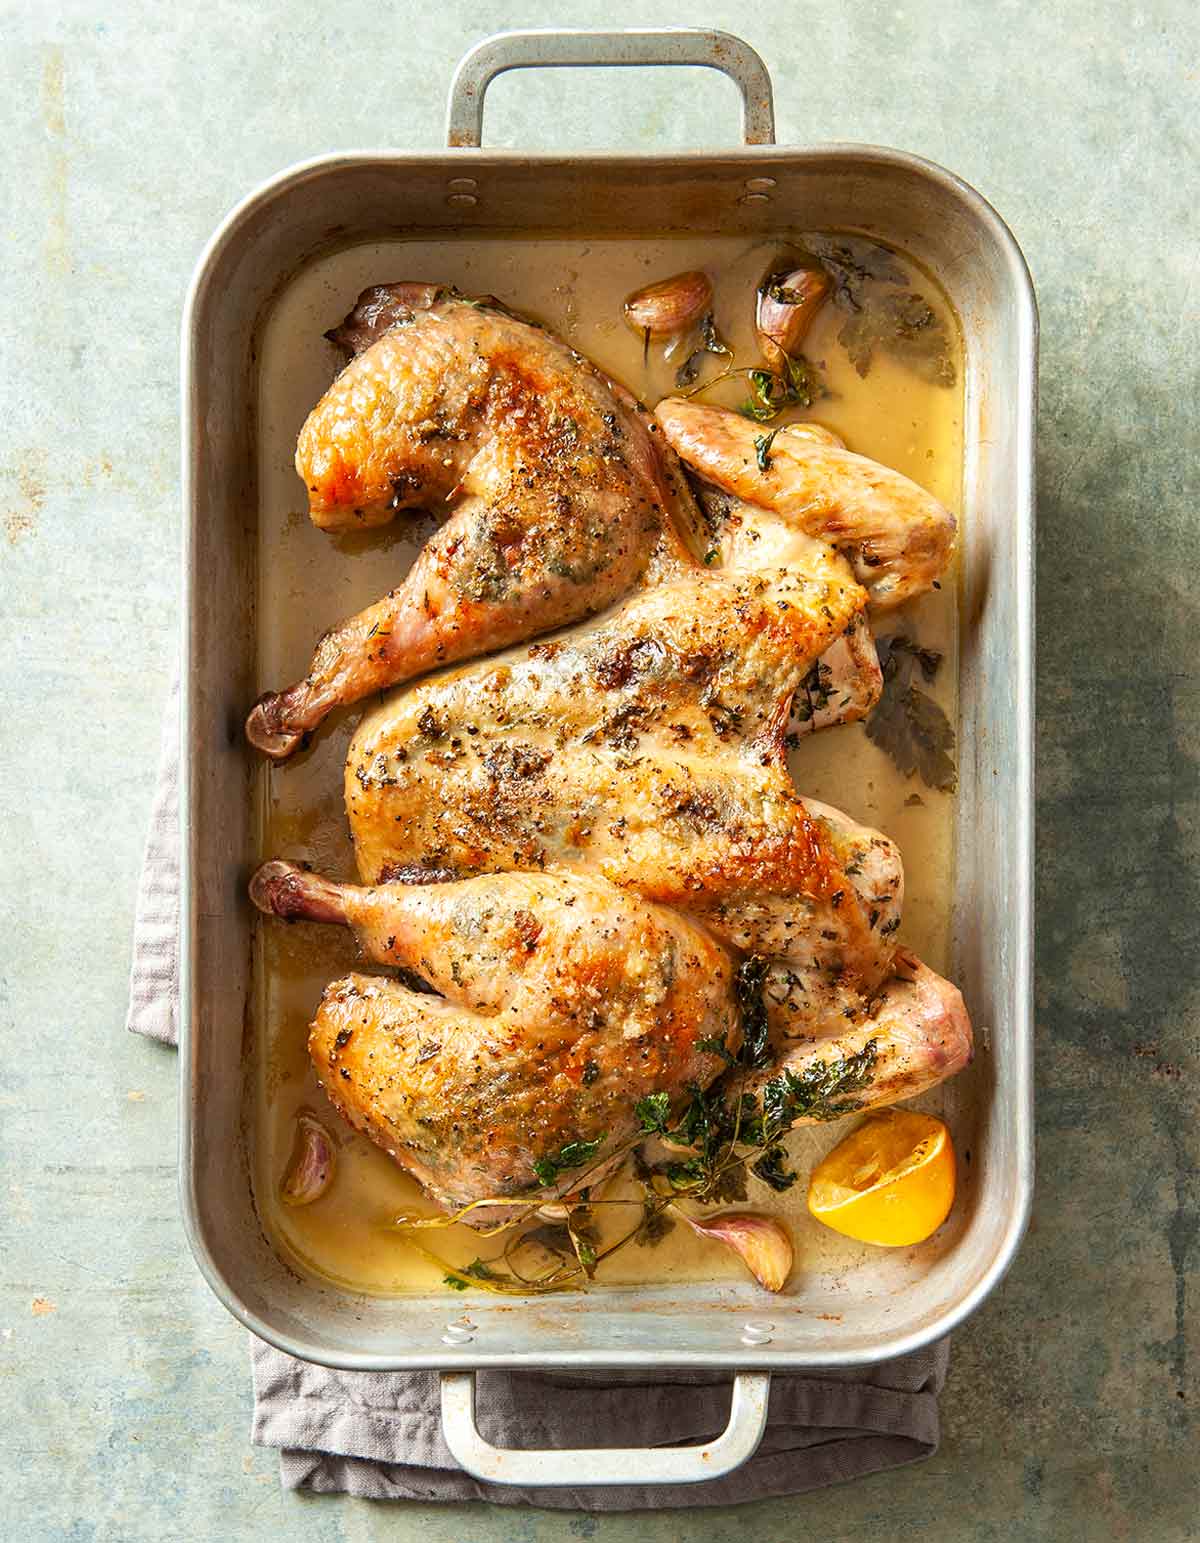 A spatchcock roast chicken in a deep roasting pan with sprigs of thyme, lemon halves, and garlic cloves.